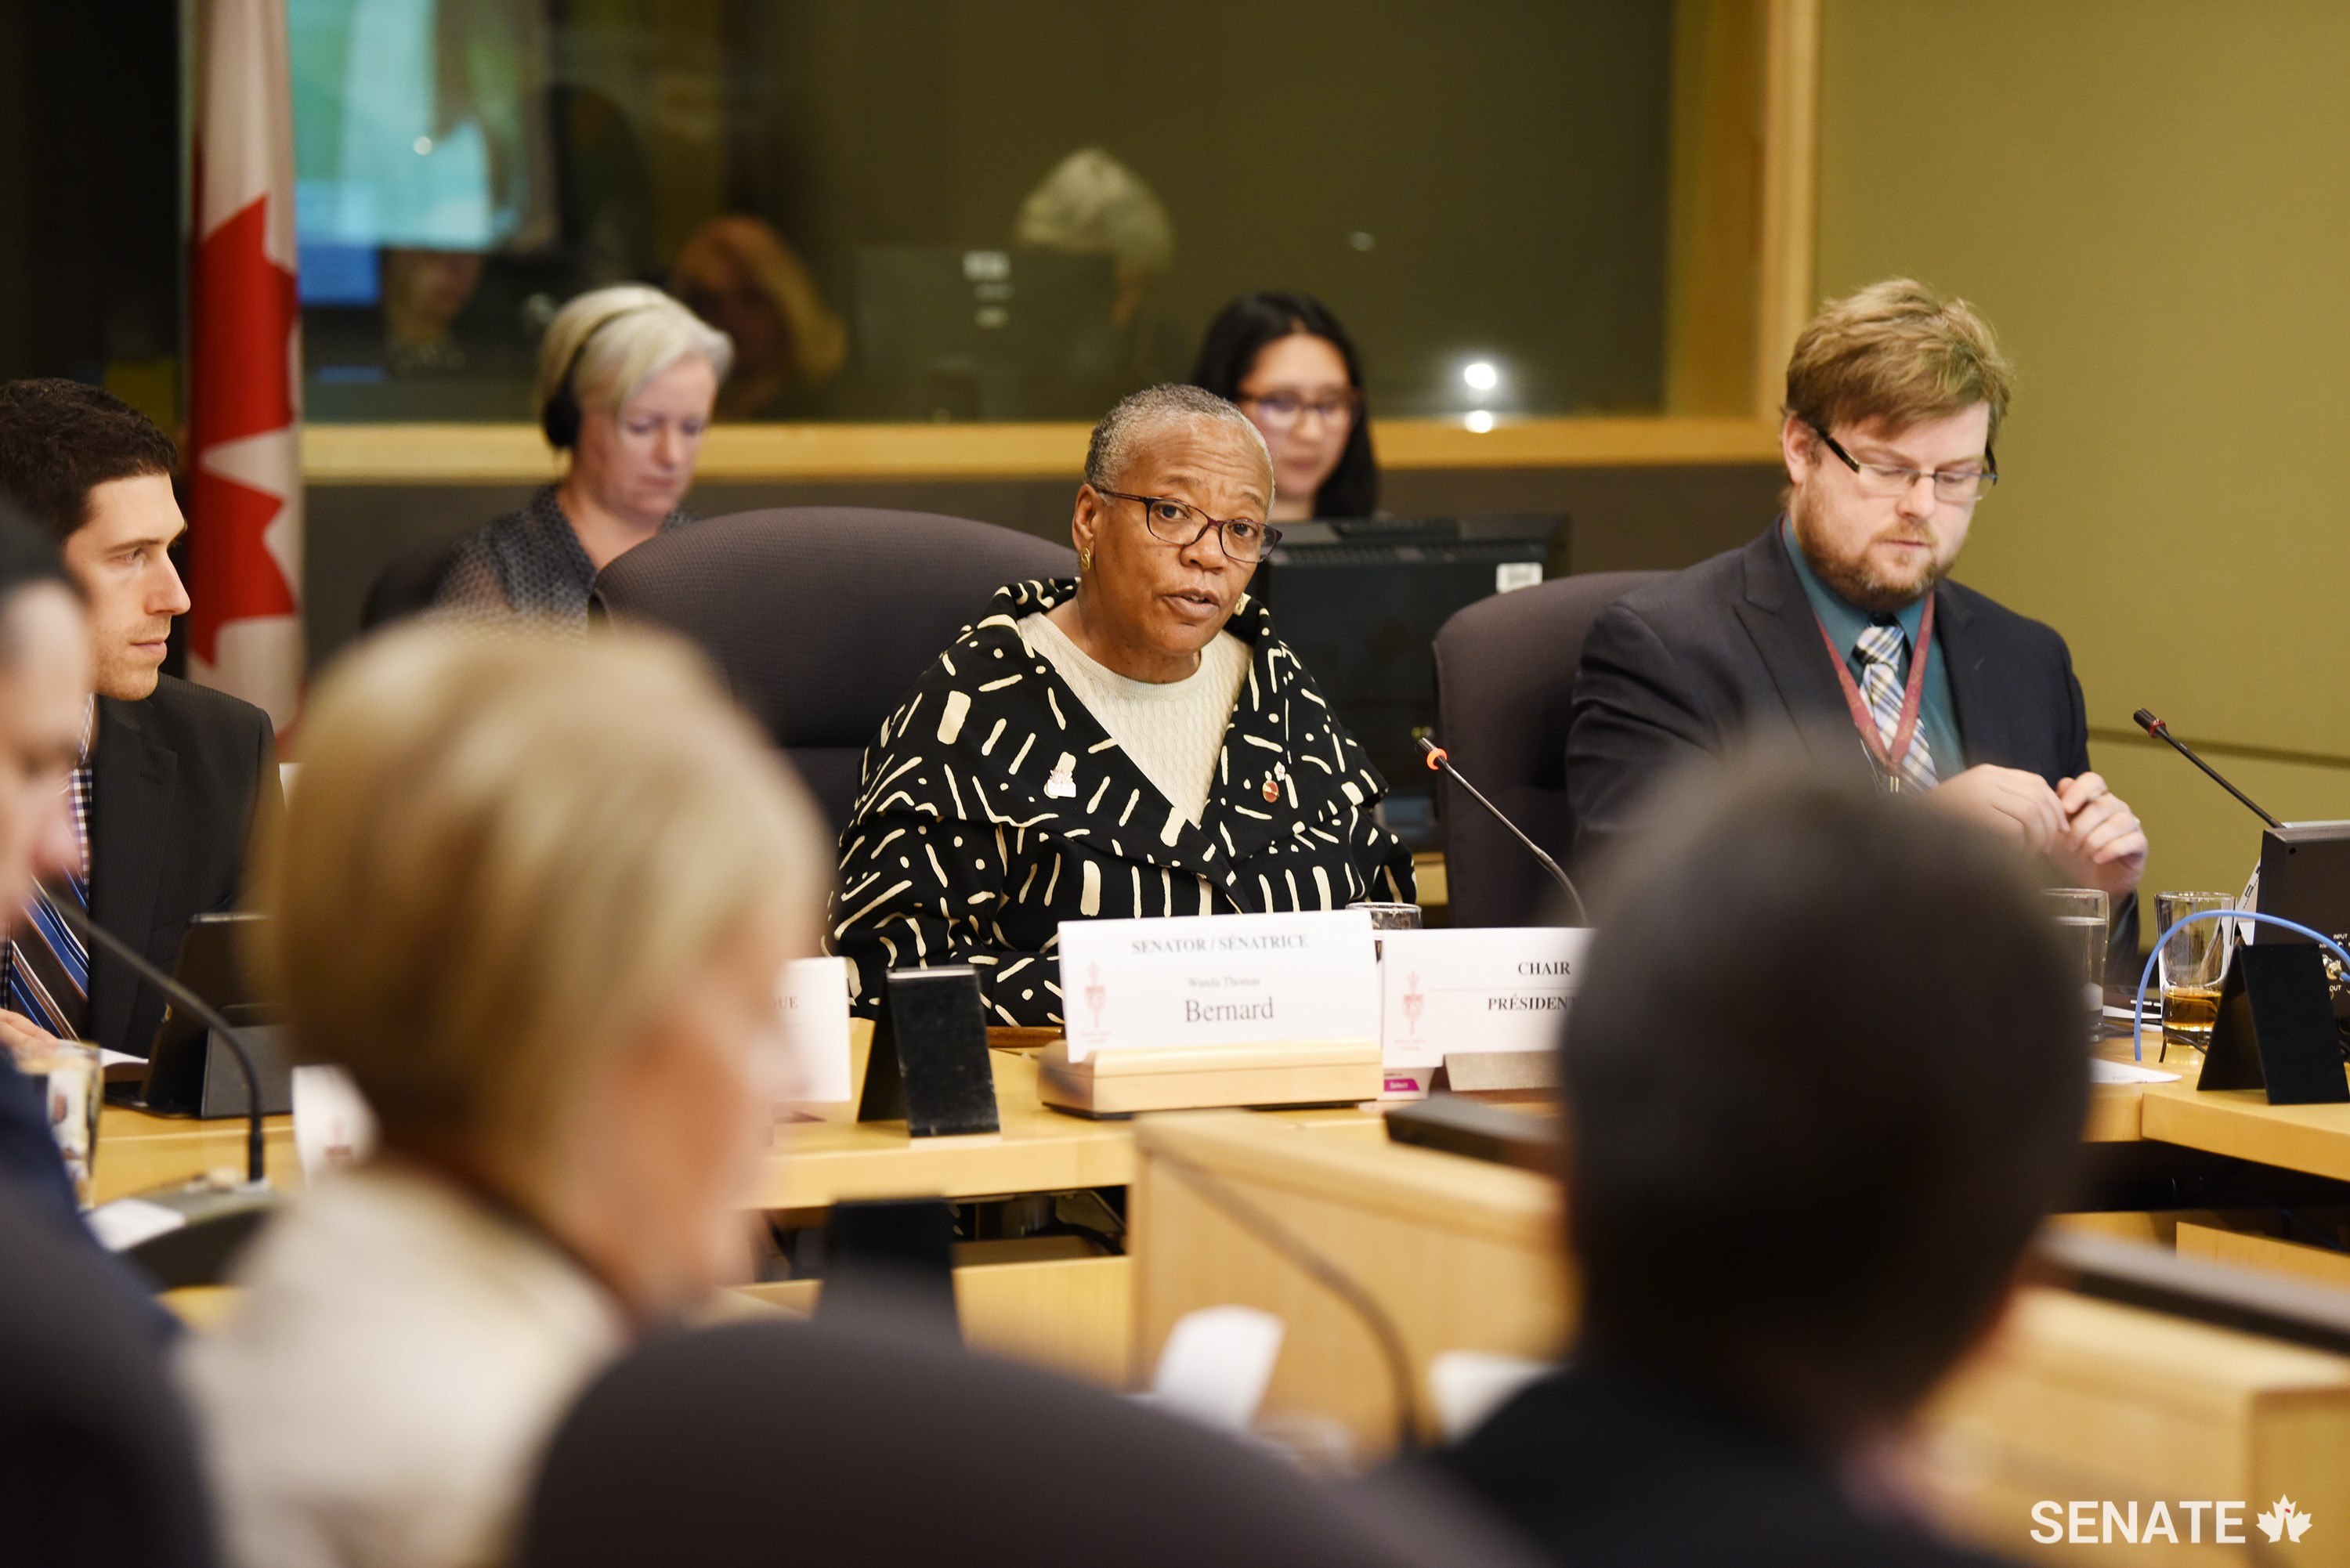 Committee chair Senator Wanda Thomas Bernard tells the Senate Committee on Human Rights that partnerships are needed to combat systemic racism in Canada. The committee devoted its special Black History Month session to the United Nations’ International Decade for People of African Descent.